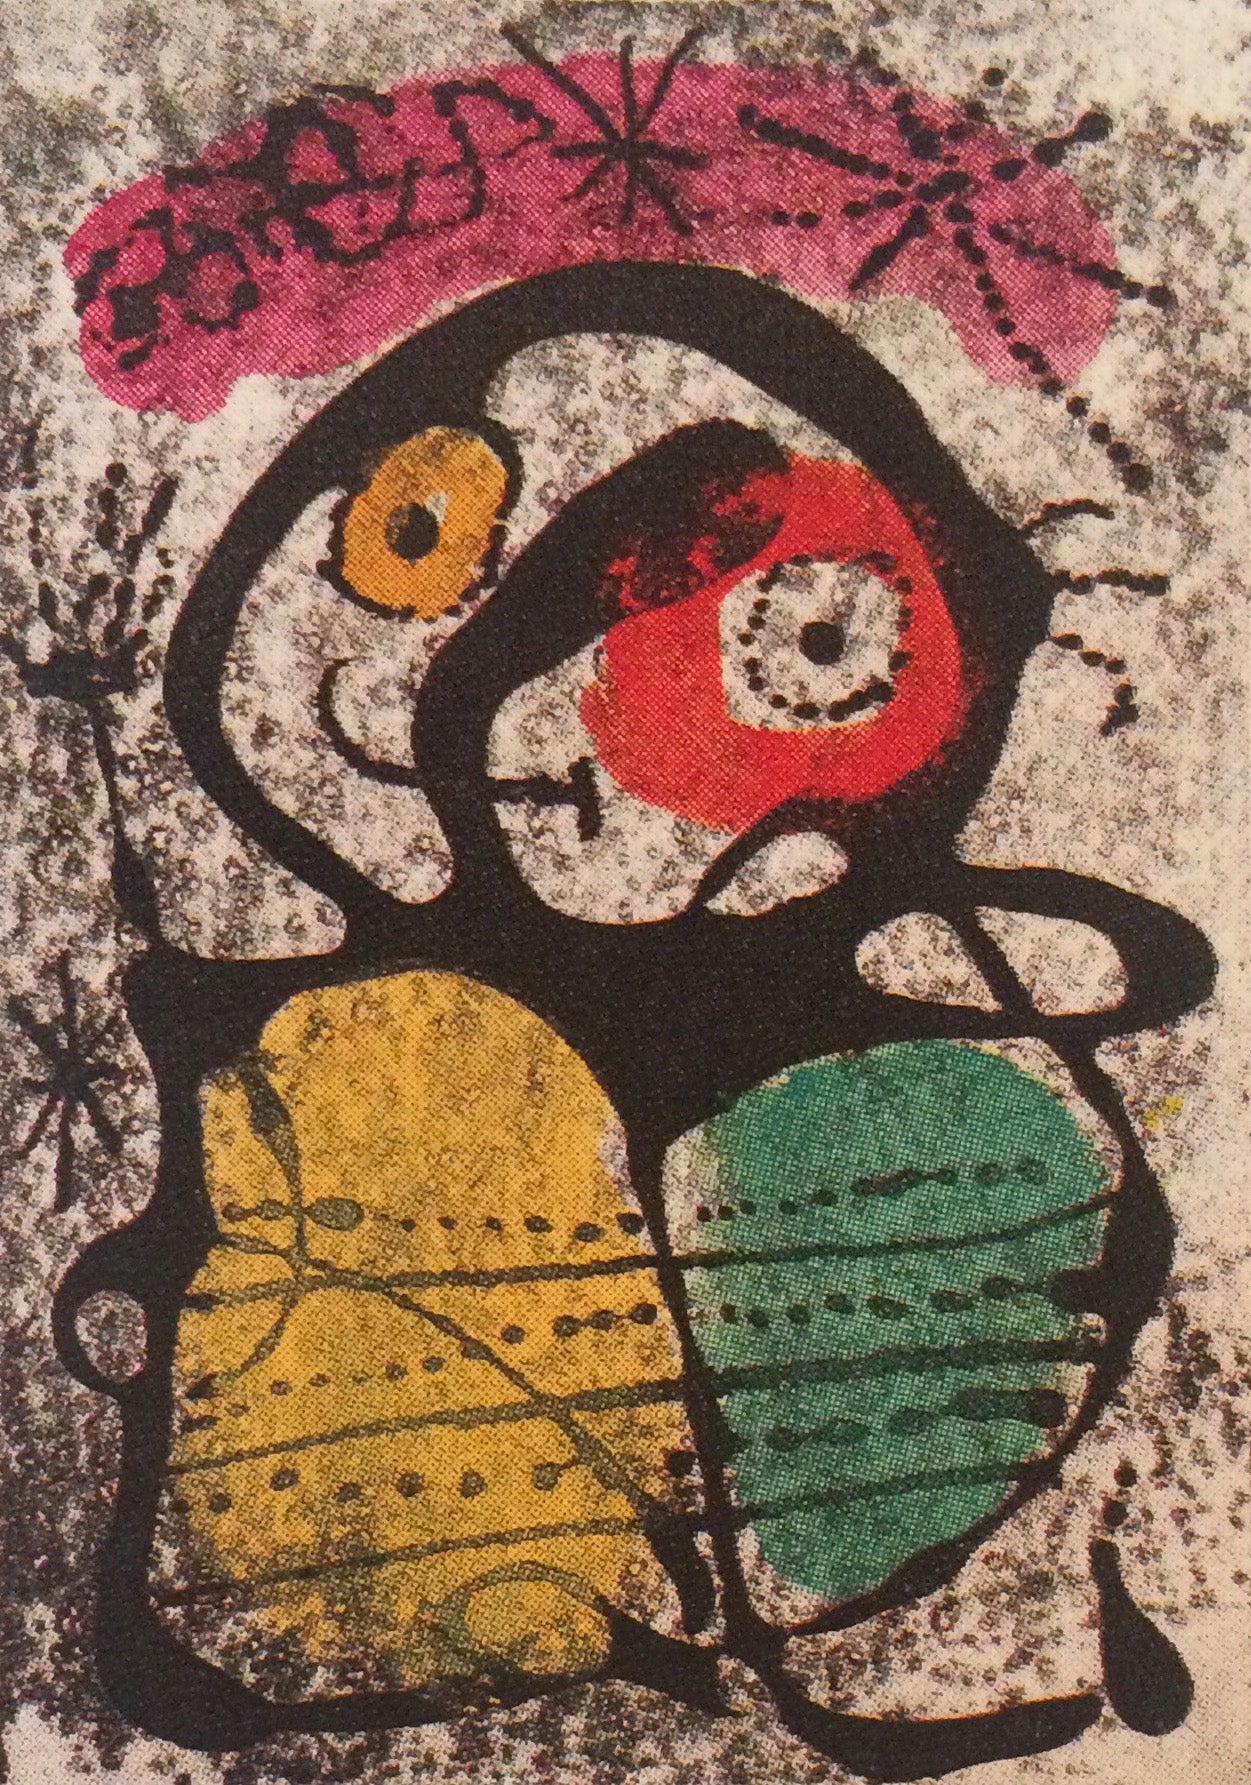 Joan Miro Constellations, Etching (Heightened in Watercolor by the Artist) (Cramer No. 58) 1959